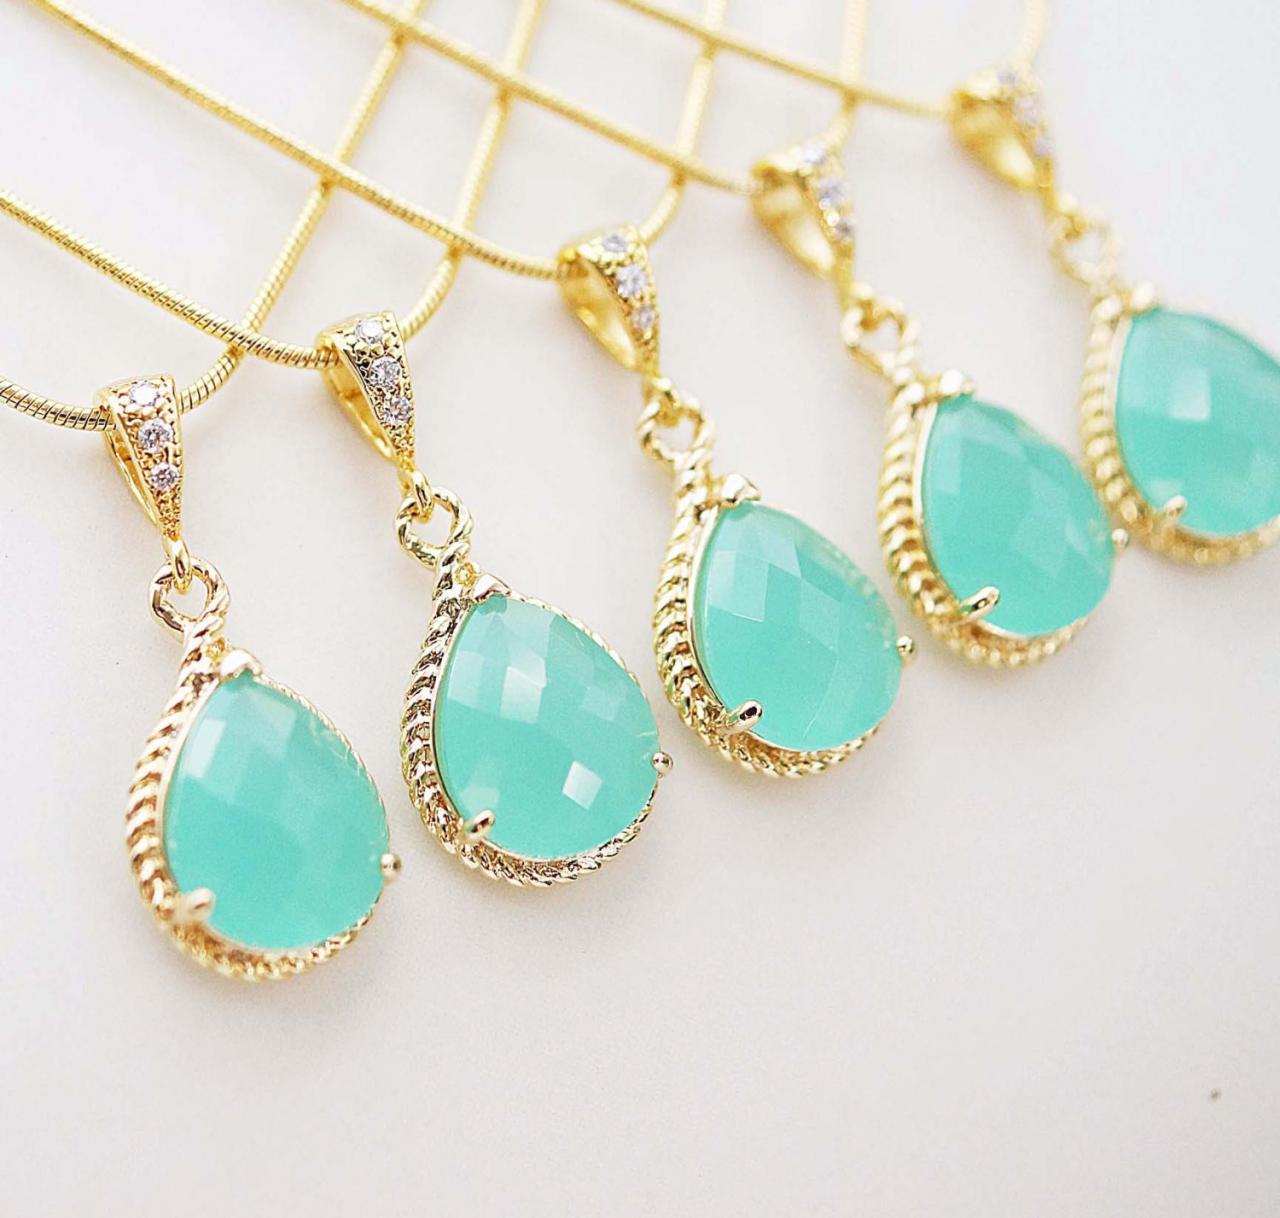 Wedding Jewelry Bridal Jewelry Bridesmaid Jewelry Bridesmaid Gift Bridesmaid Necklace Mint Opal Gold Trimmed Pear Cut Necklace